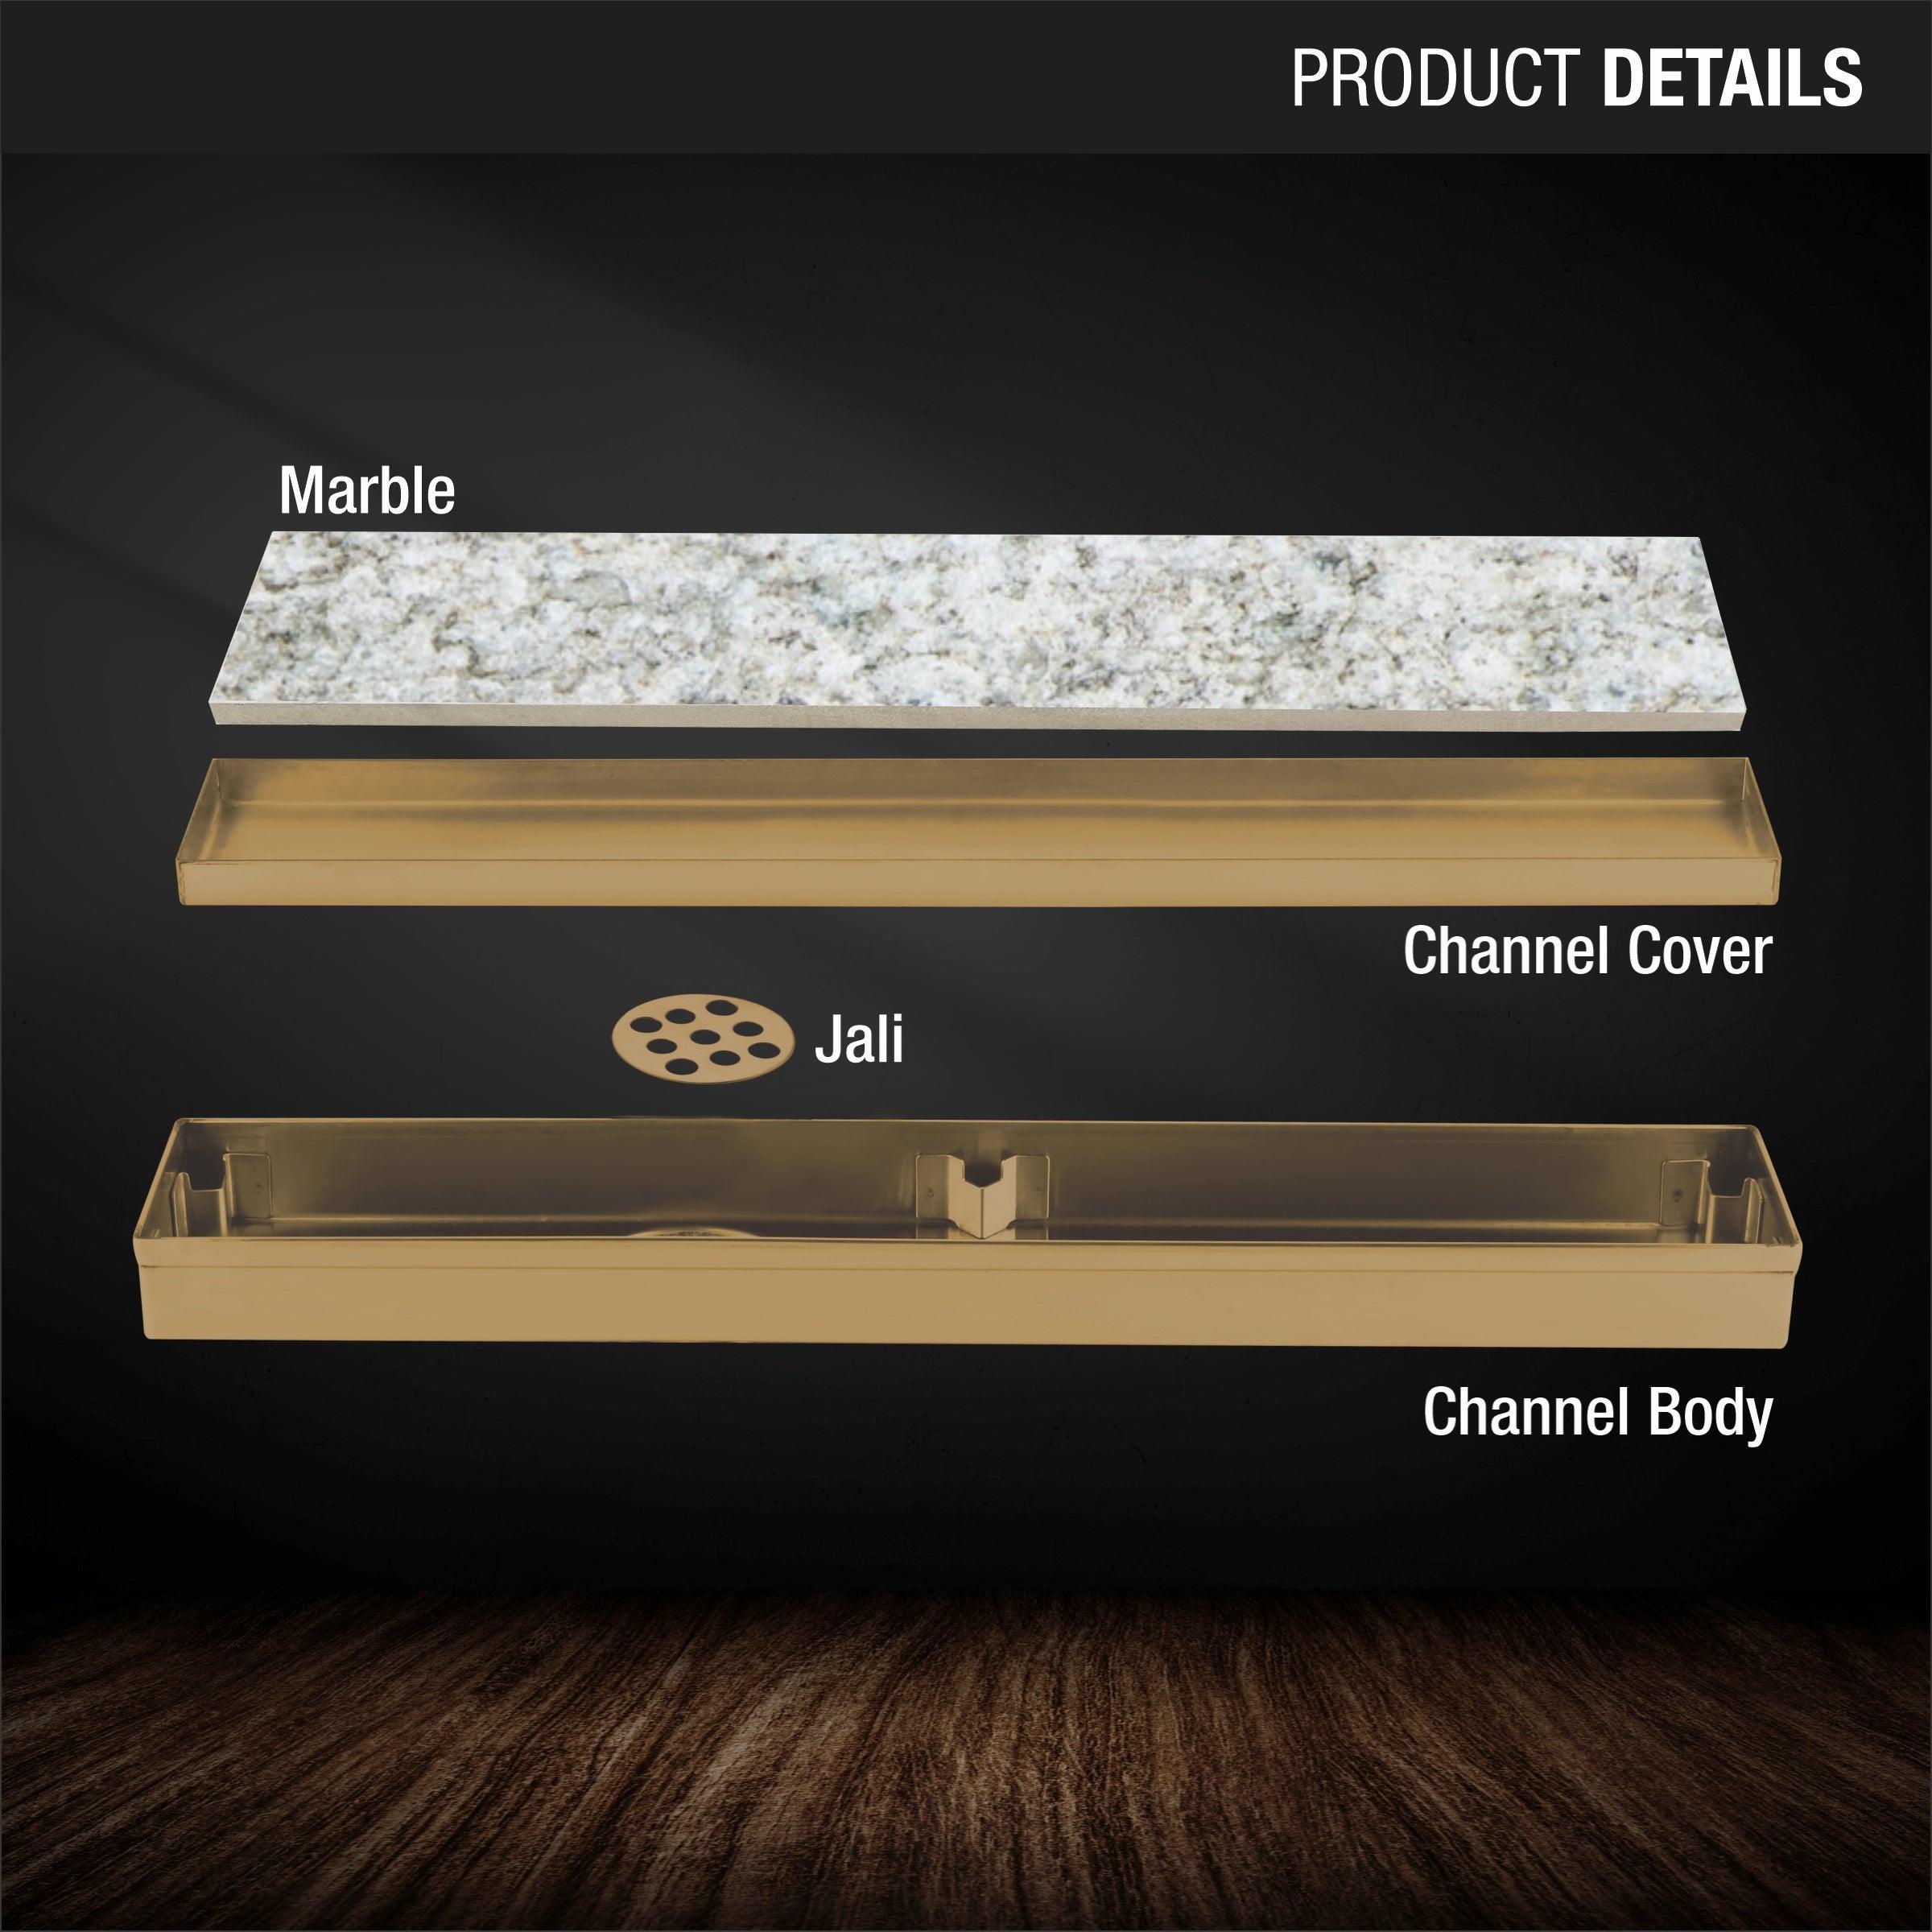 Marble Insert Shower Drain Channel - Yellow Gold (12 x 2 Inches) product details